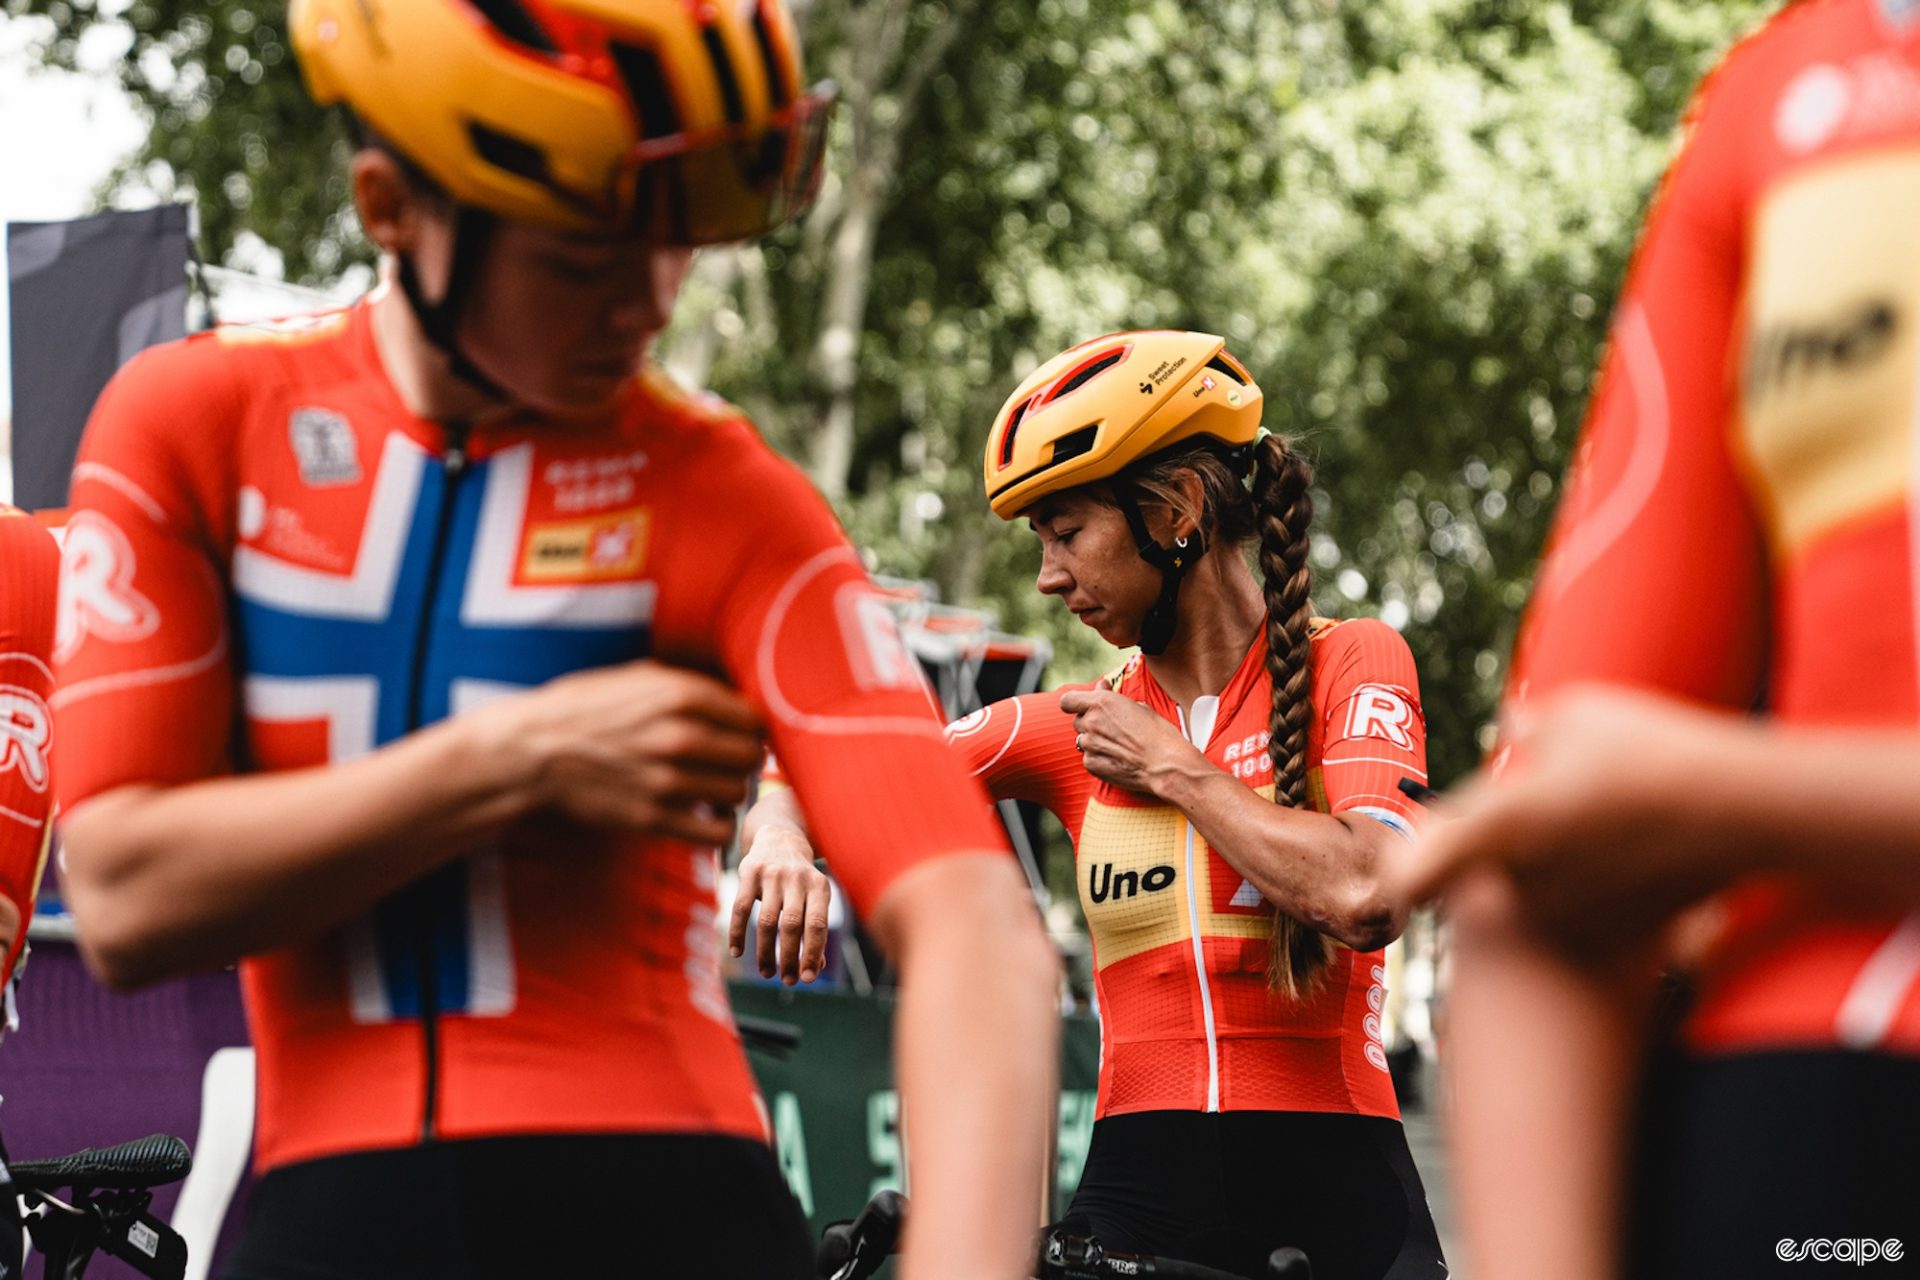 Uno-X's distinctive kits are almost all red on the jerseys with a yellow block across the chest, accented by the yellow helmets.